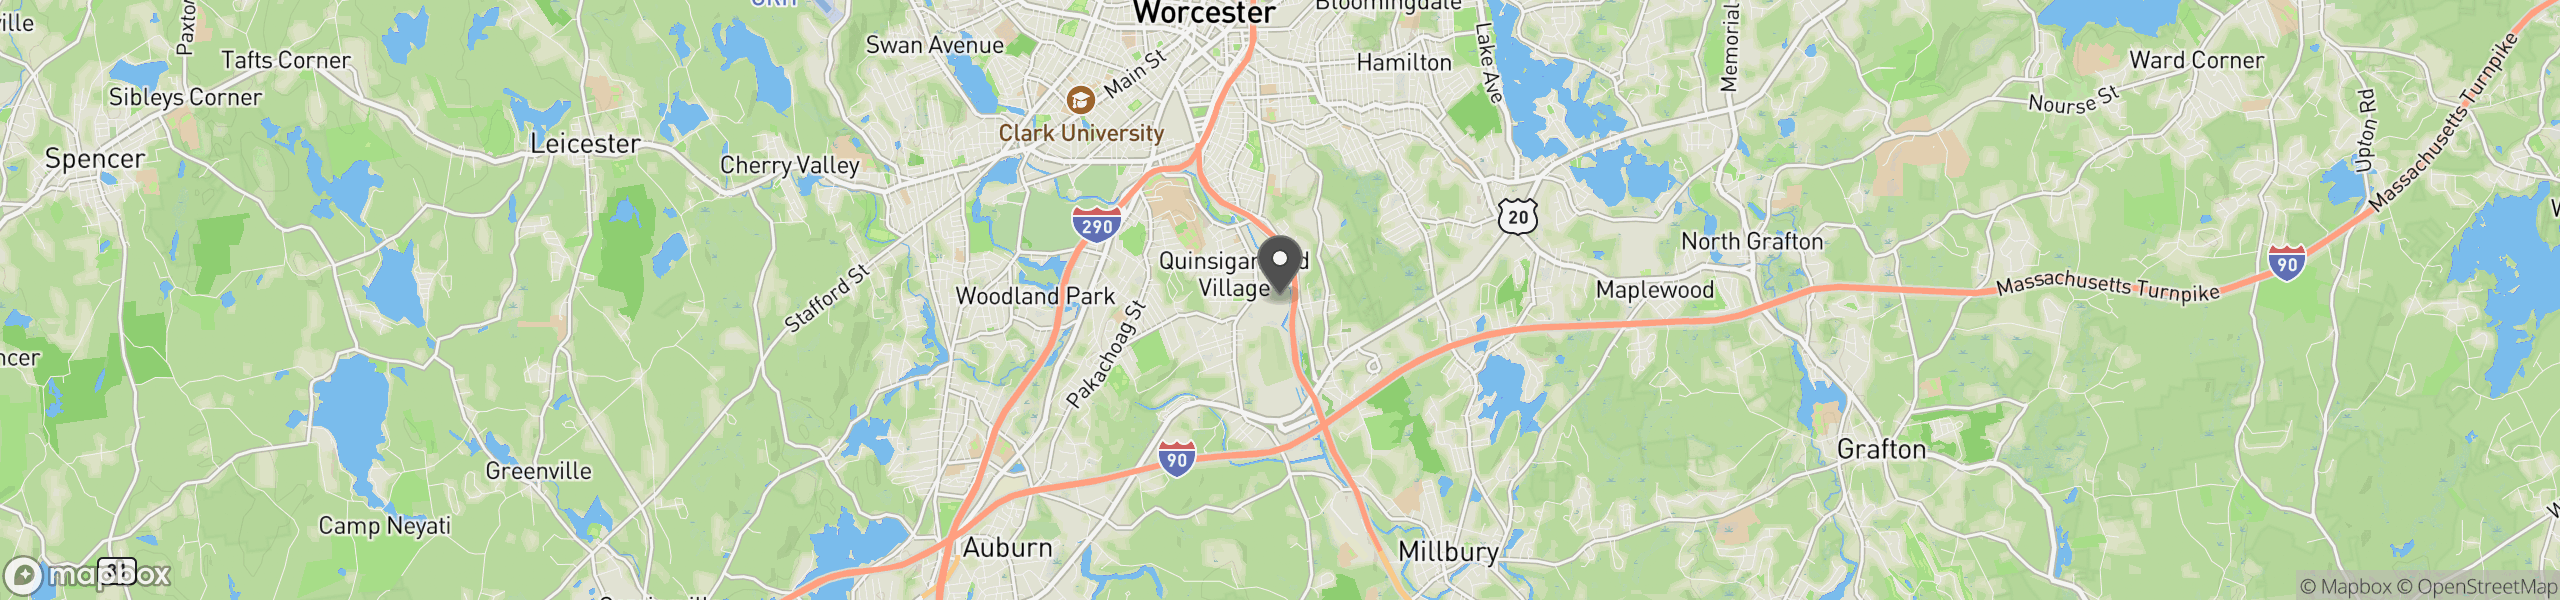 Worcester, MA 01607